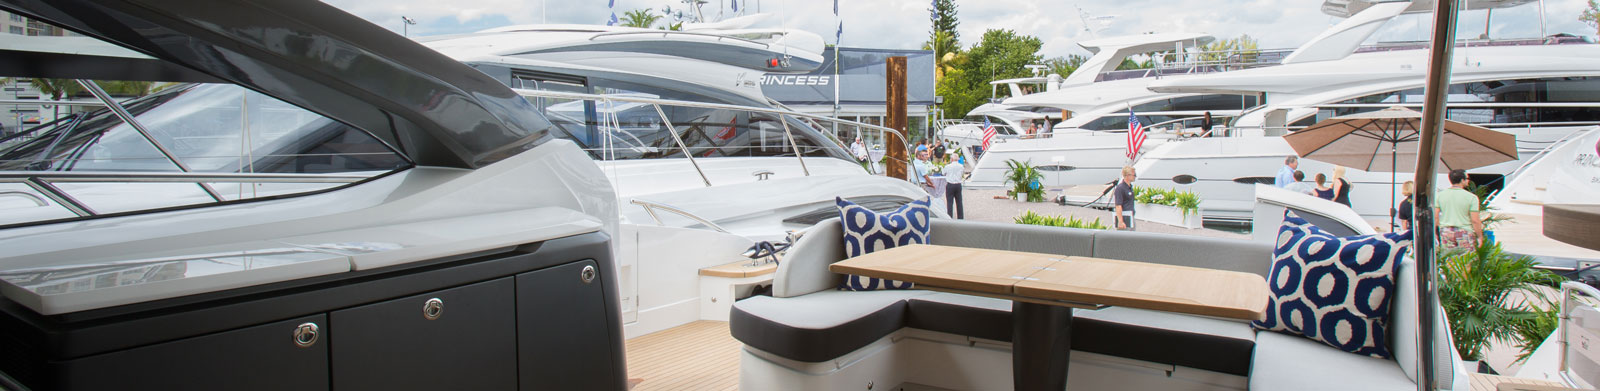 Top 5 Shops to Help Stylize Your Boat